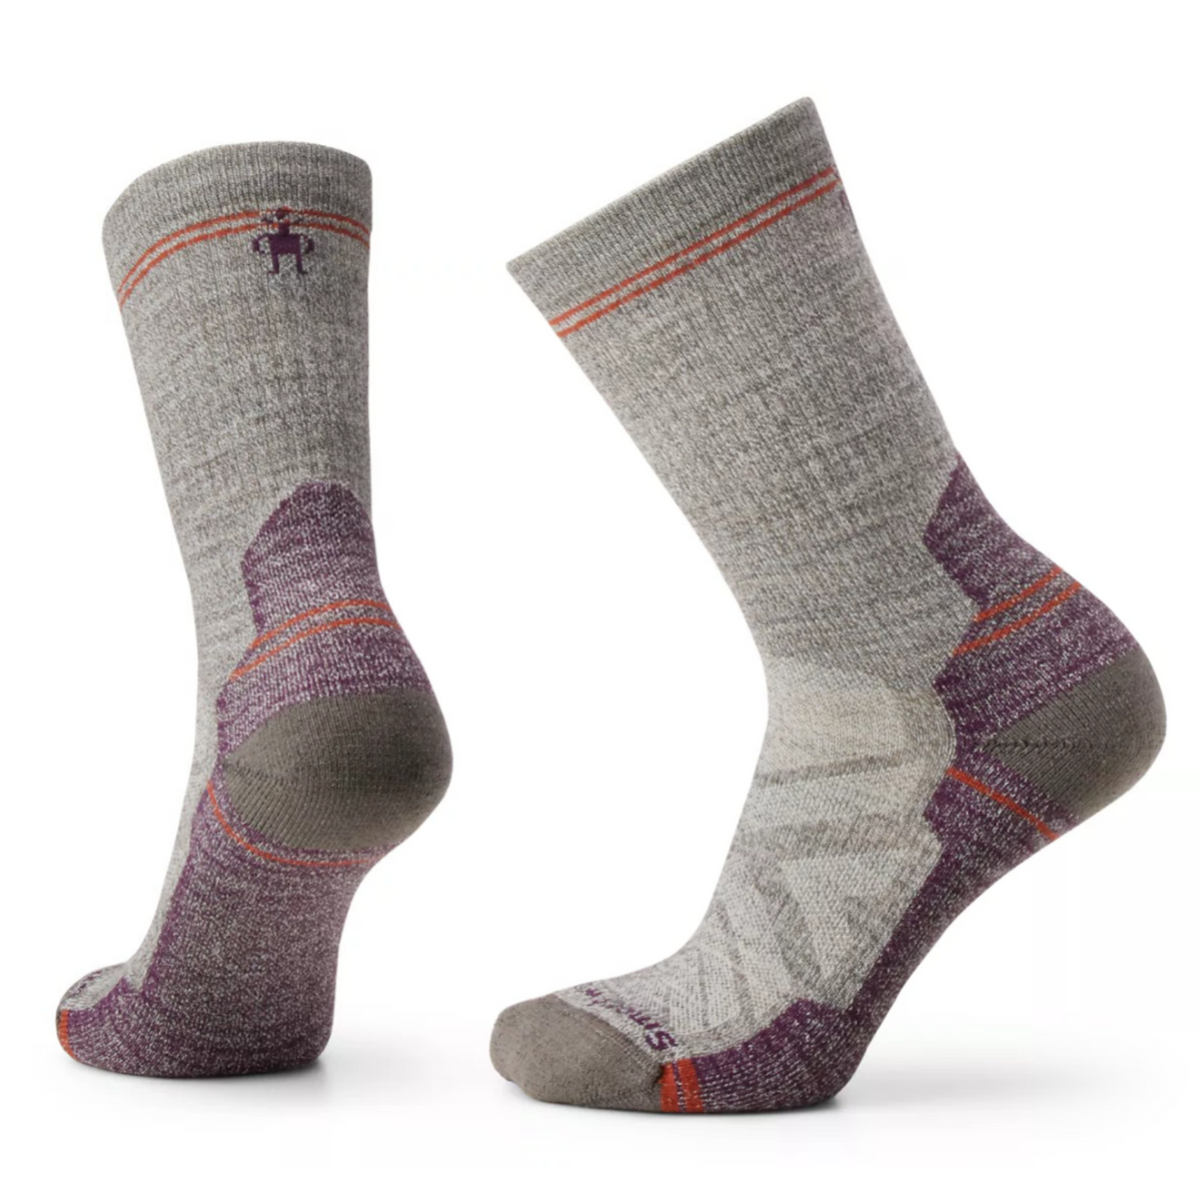 Smartwool Hike Light Cushion Crew women&#39;s sock featuring taupe sock with purple/taupe blend on bottom and achilles area. Socks shown on display feet. 